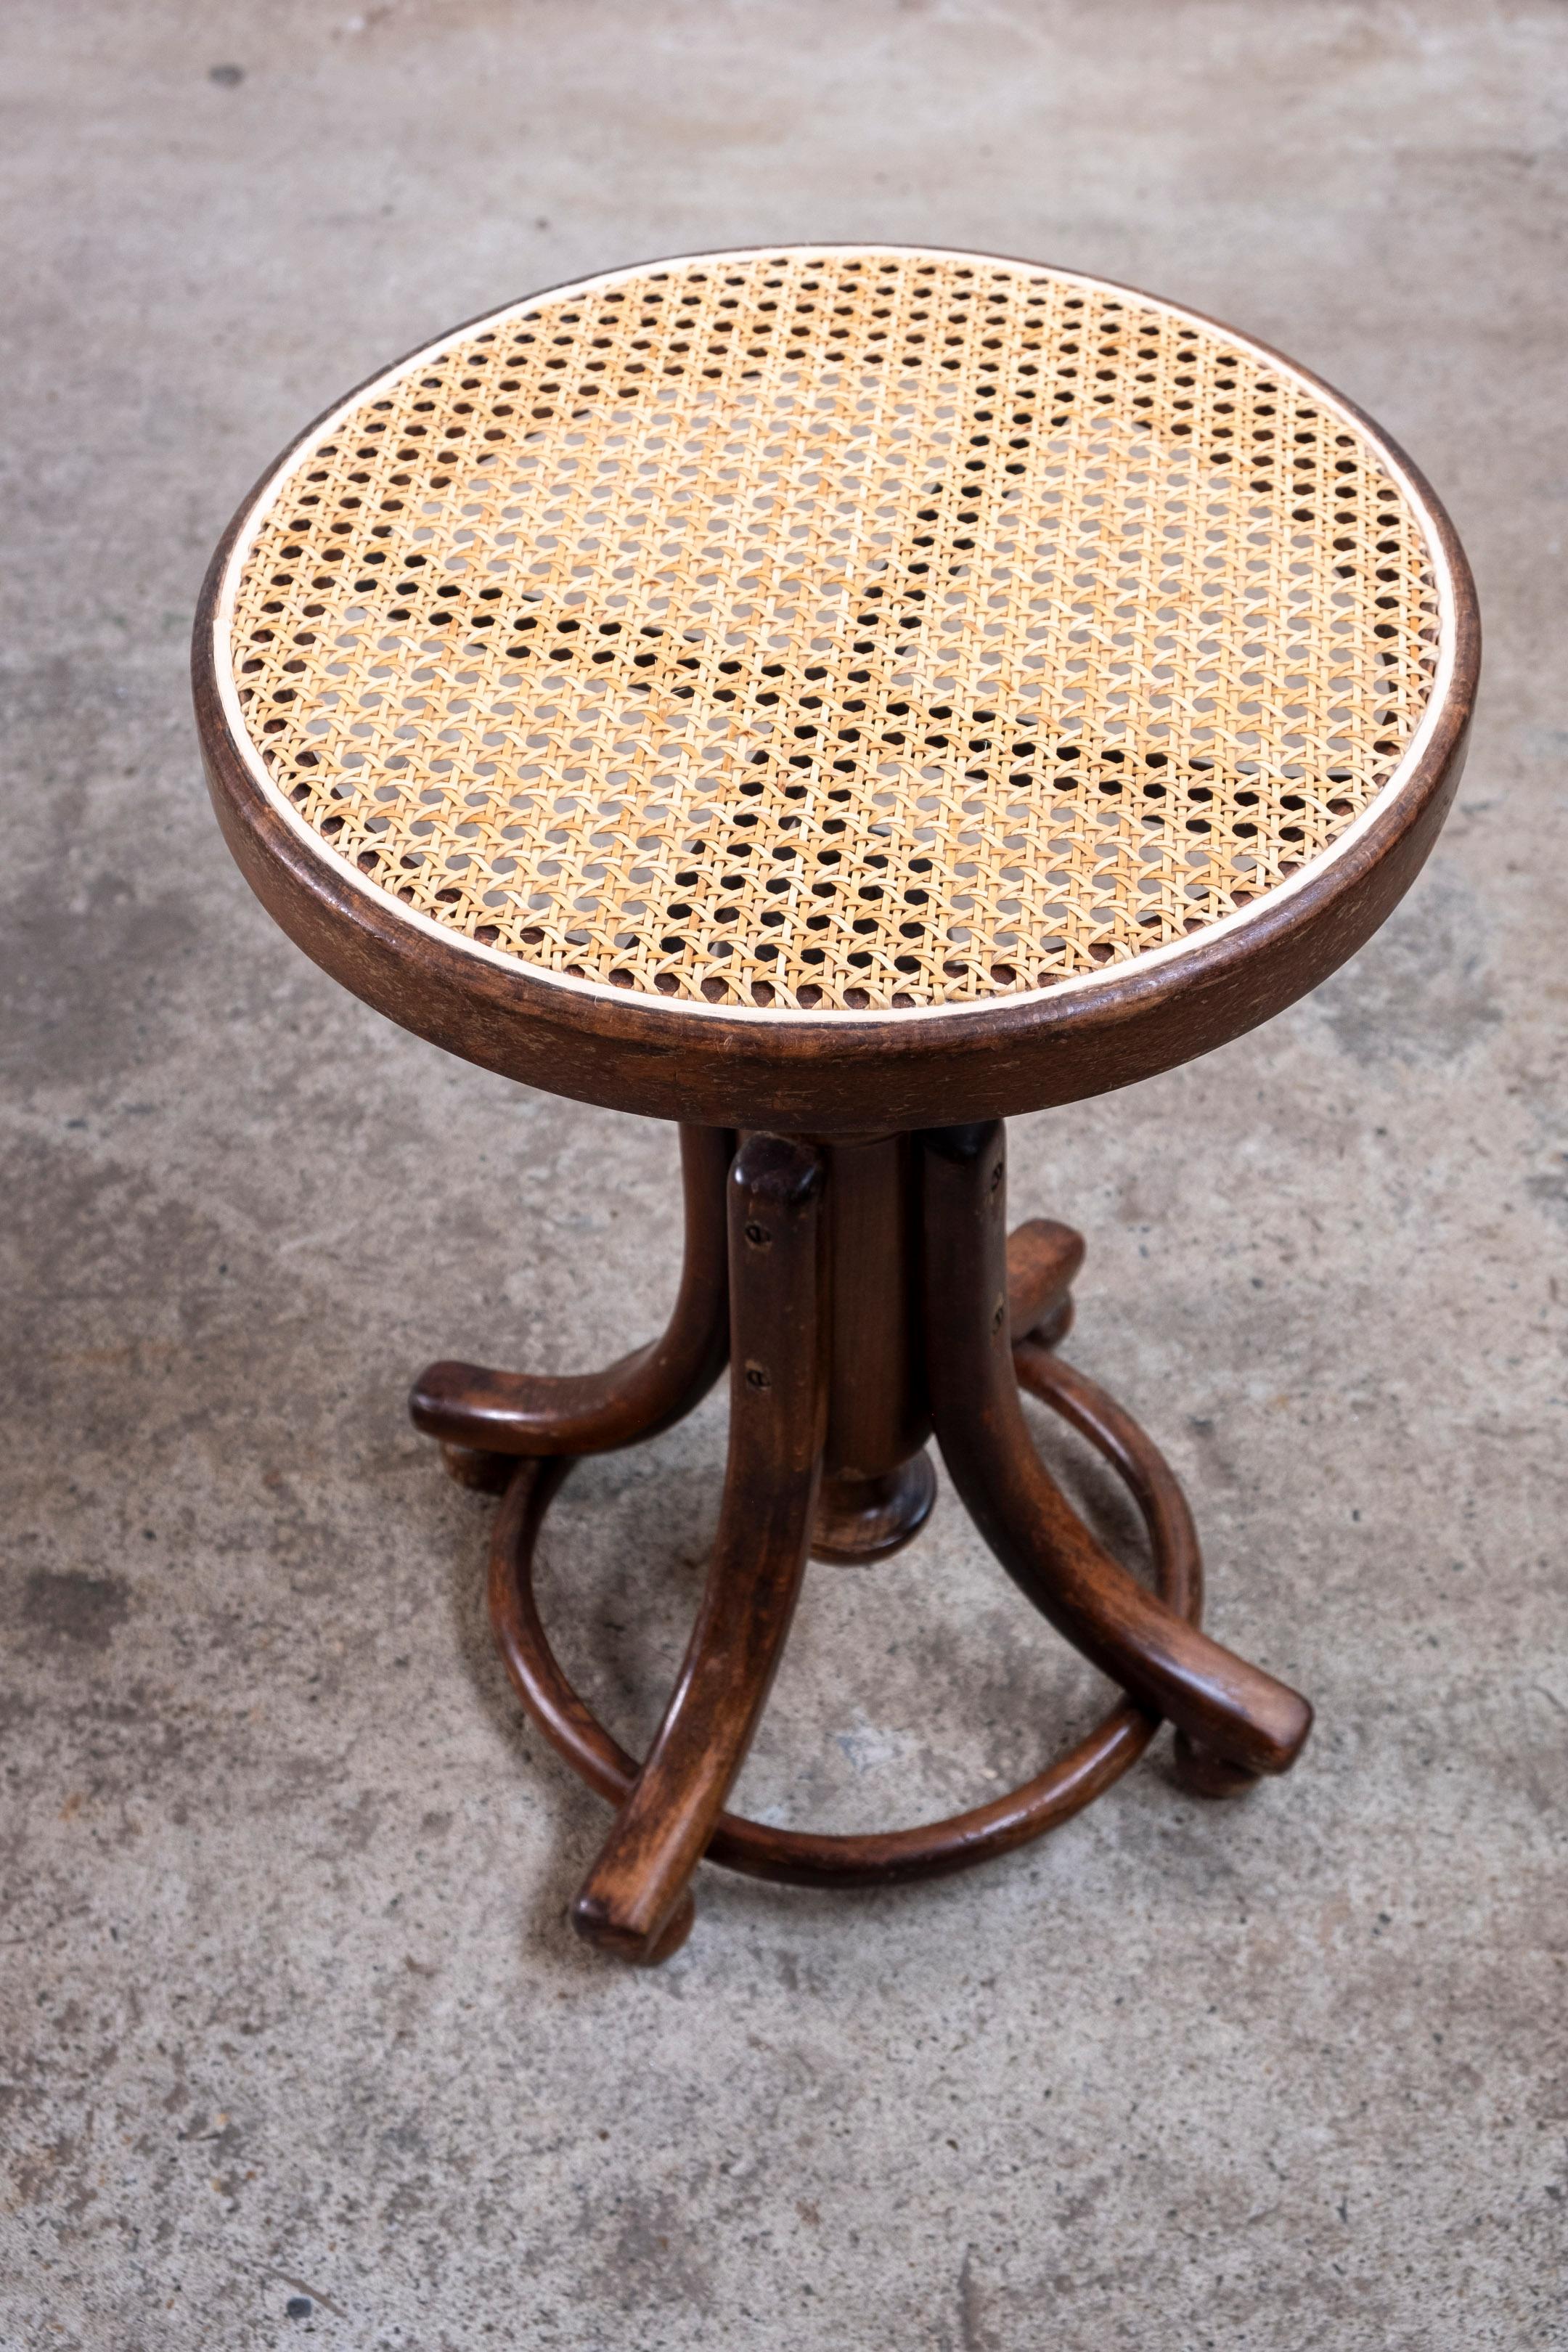 Woven Adjustable Piano Stool in The Style of Thonet, 1940s For Sale